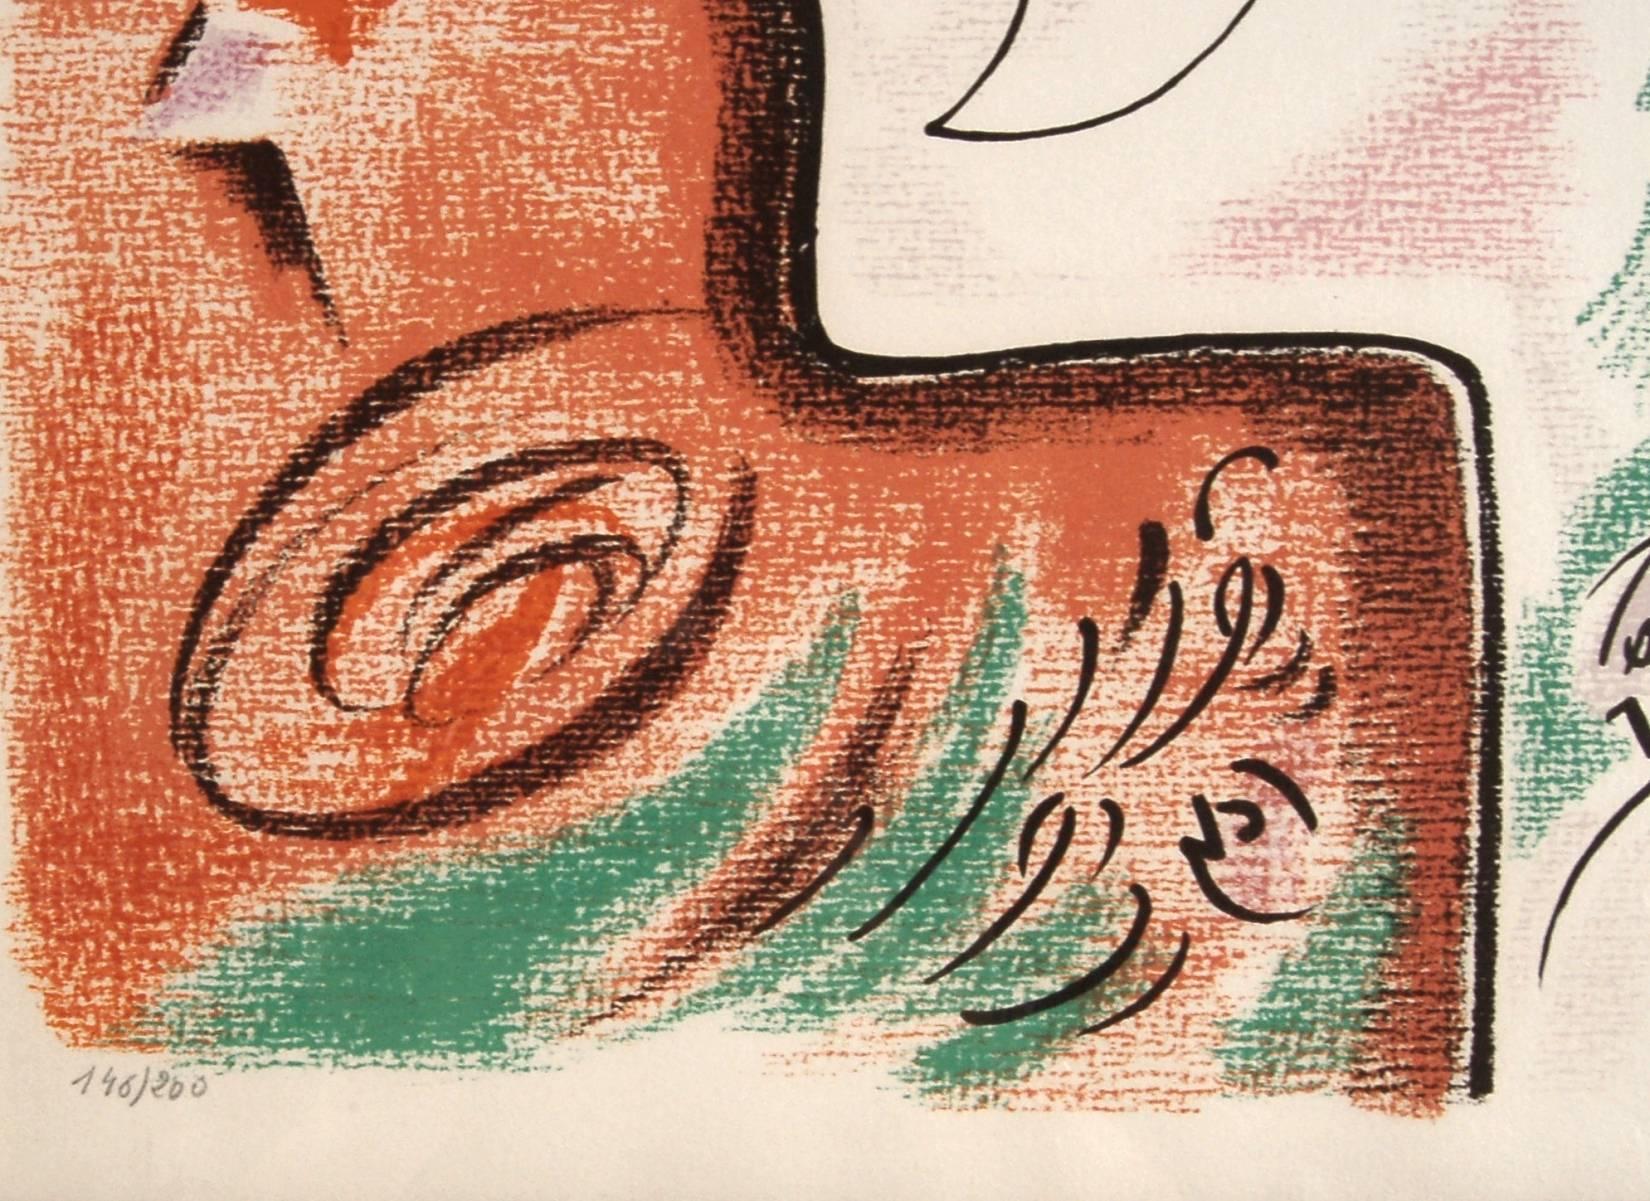 Artist:	Andre Masson (French)
Title:	Surrealist Woman
Year:	1970
Medium:	Color lithograph
Edition:	Numbered 146/200 in pencil
Image size: 24 x 18.5 inches
Signature:   Hand signed in pencil by the artist
Printer:	   Fernand Mourlot, Paris
Condition: